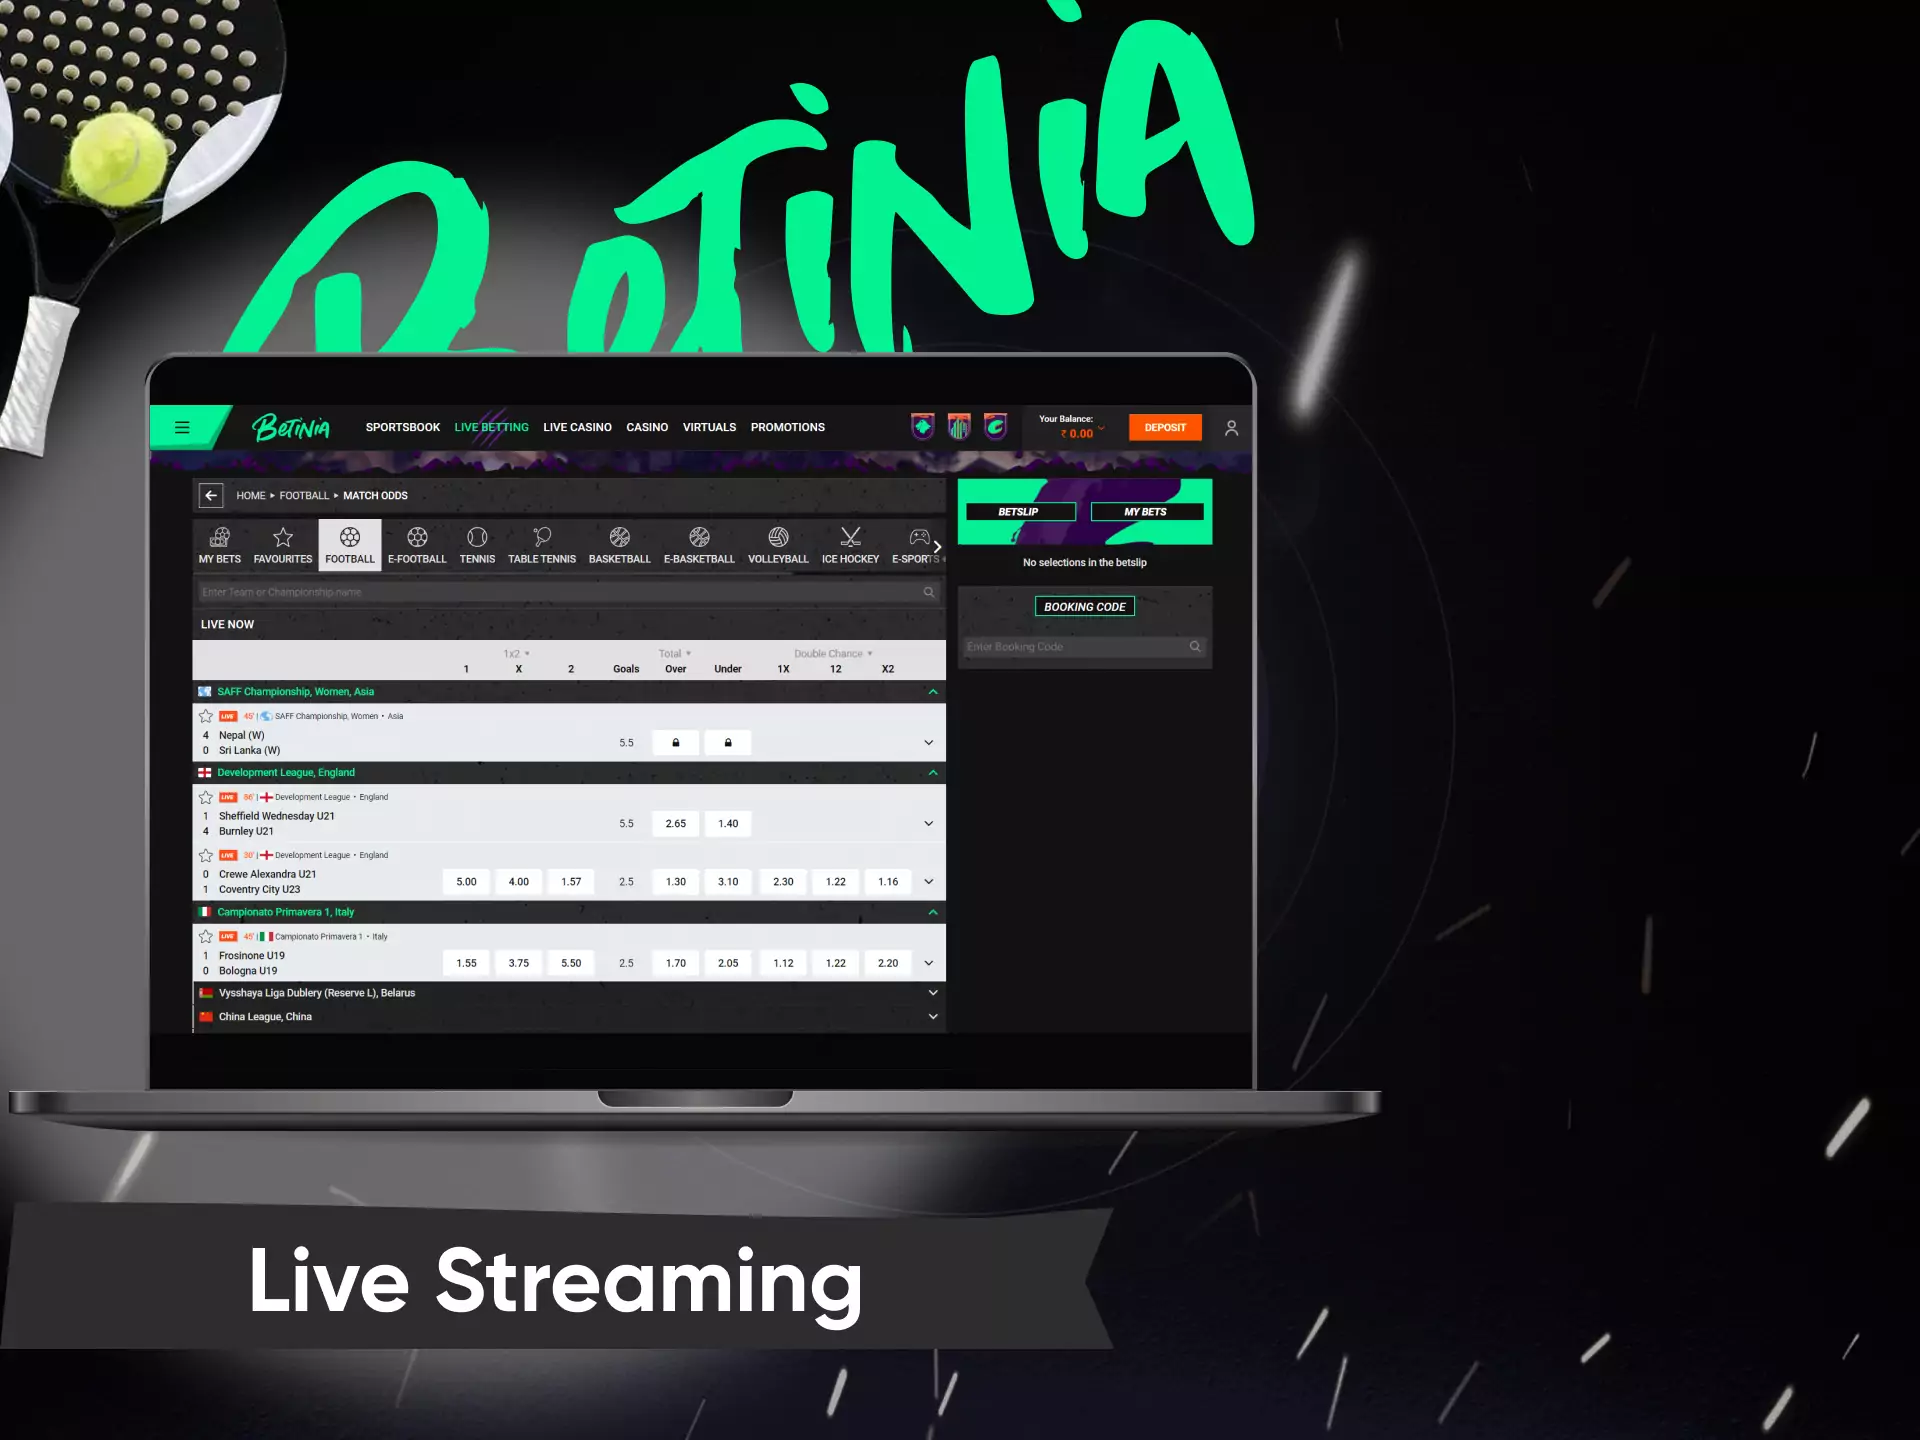 Follow the live matches right on the Betinia website.